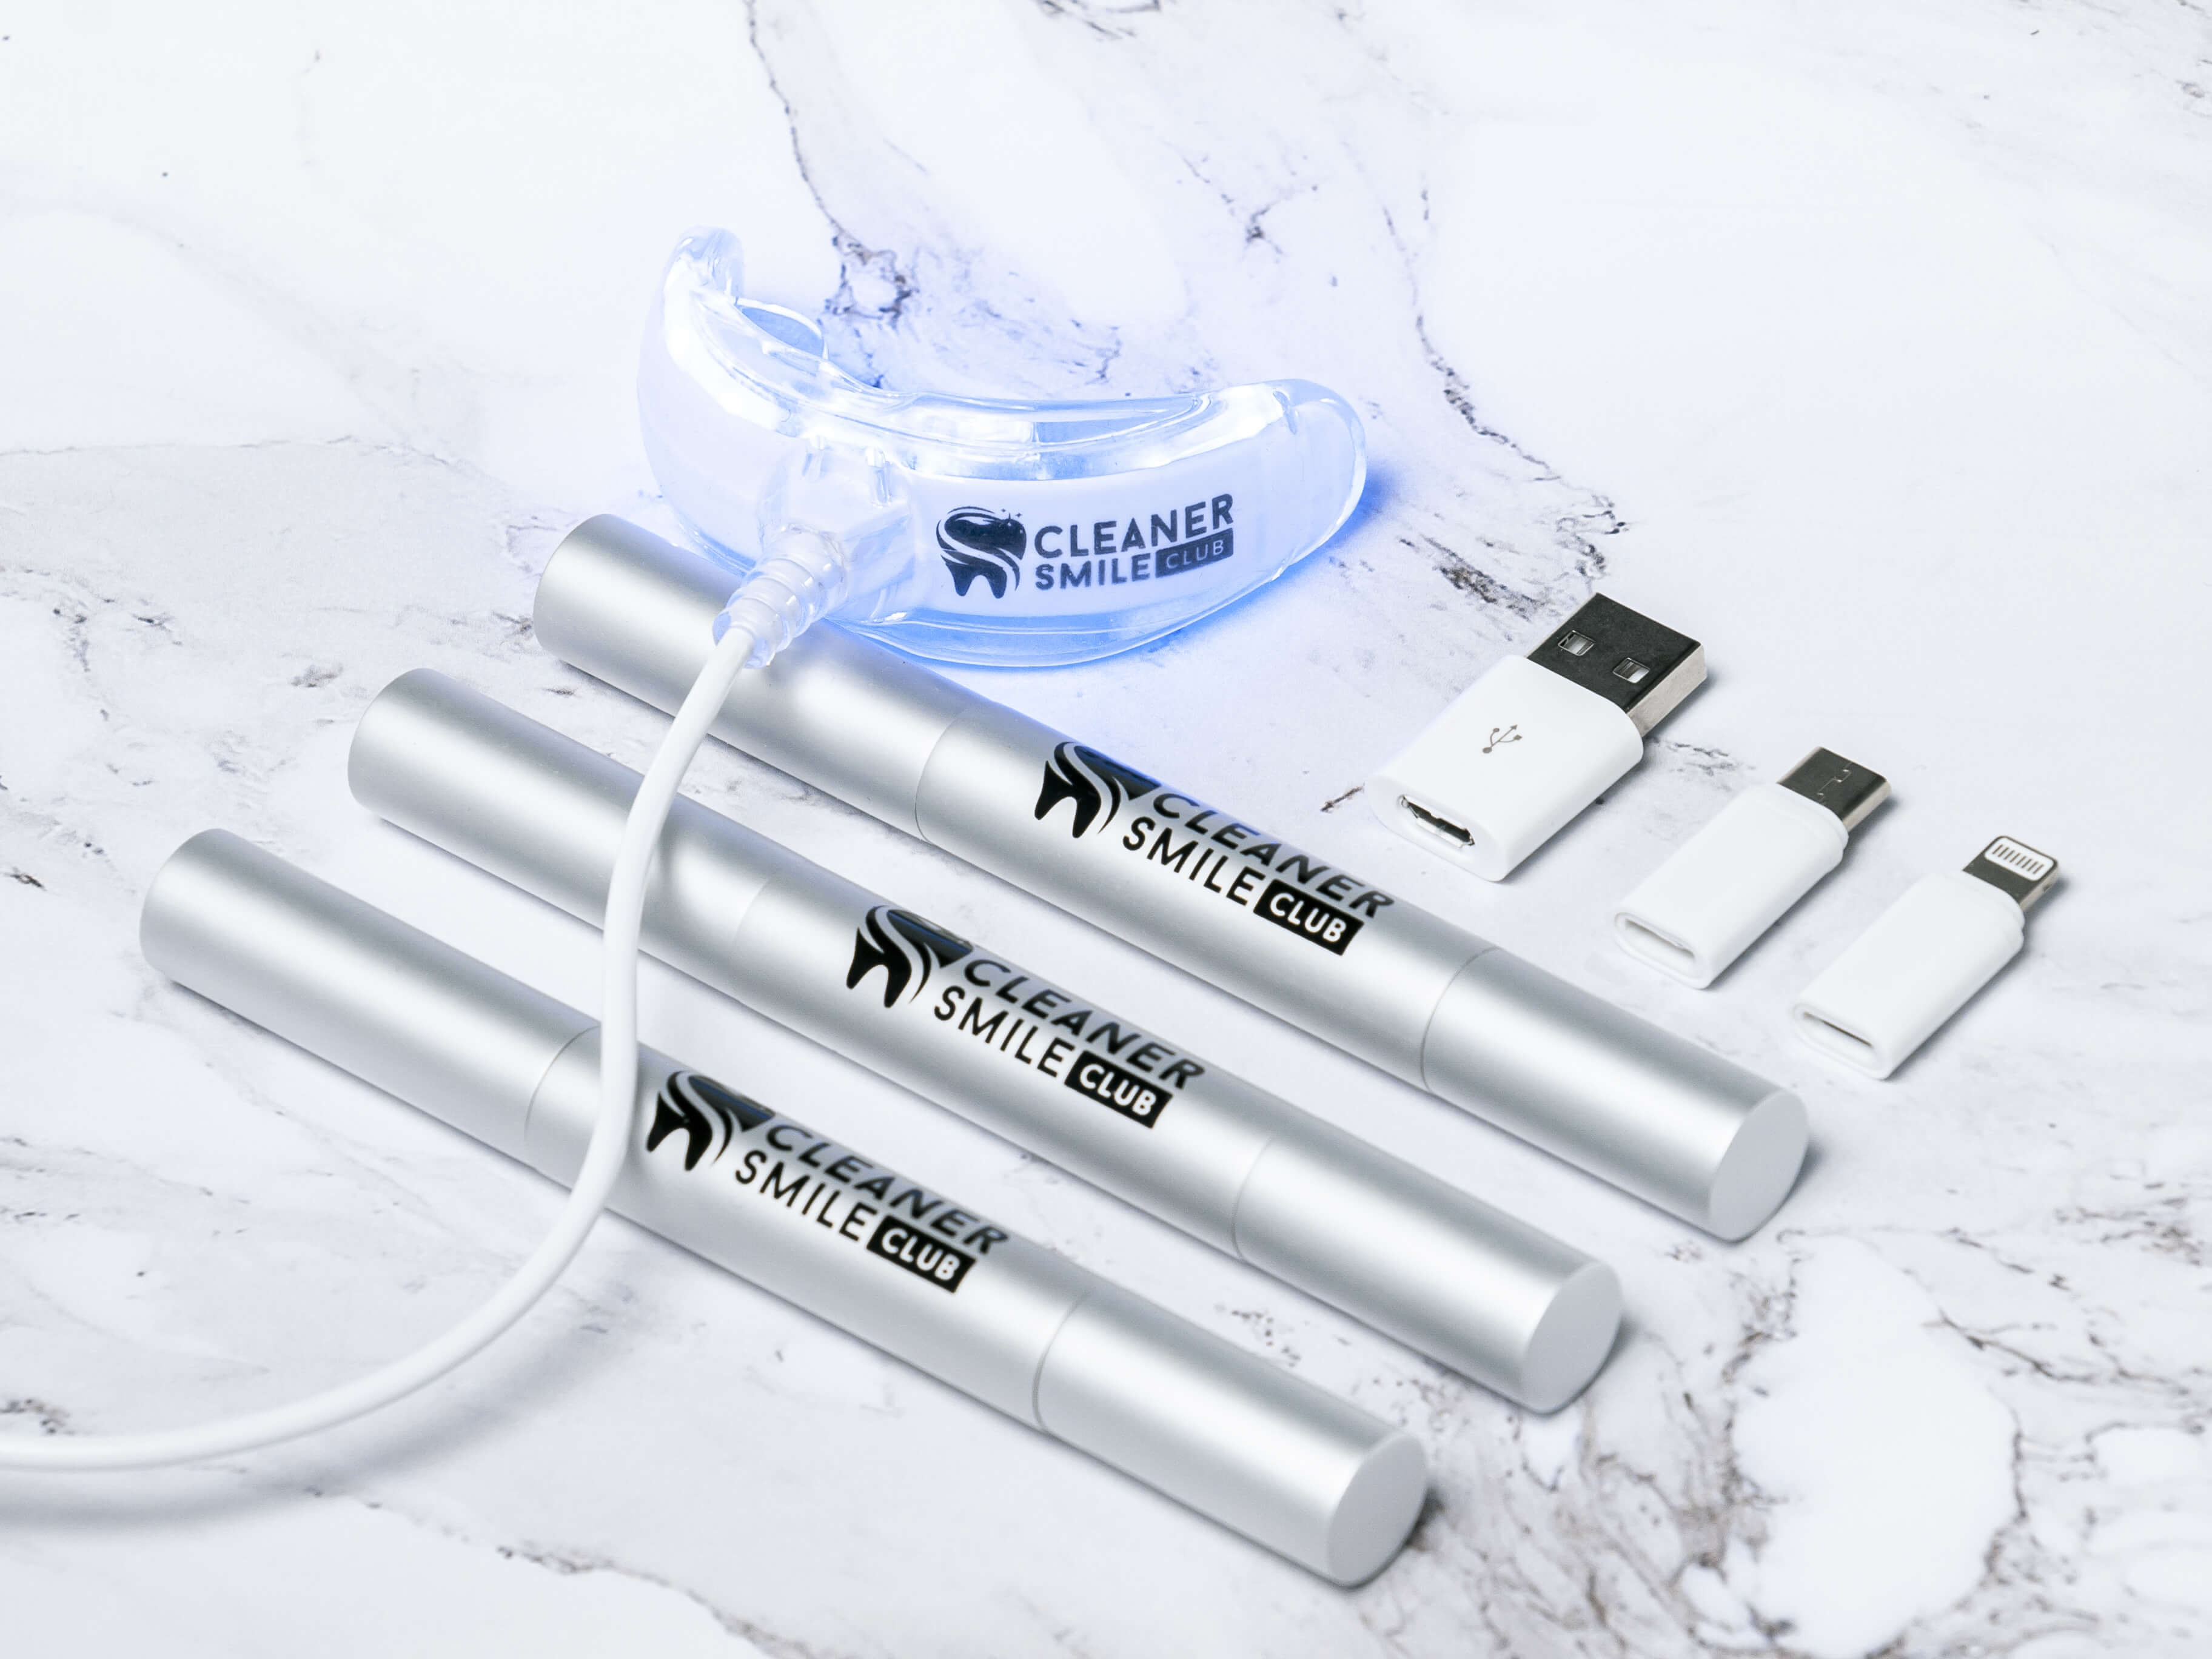 The best ways to whiten teeth are to use teeth whitening black kit from Cleaner Smile Club commercial that consist from 3 silver whitening pens and LED mouth piece with black logo commercial photo made by Fantastic Imago Branding, Advertising and Consulting Agency